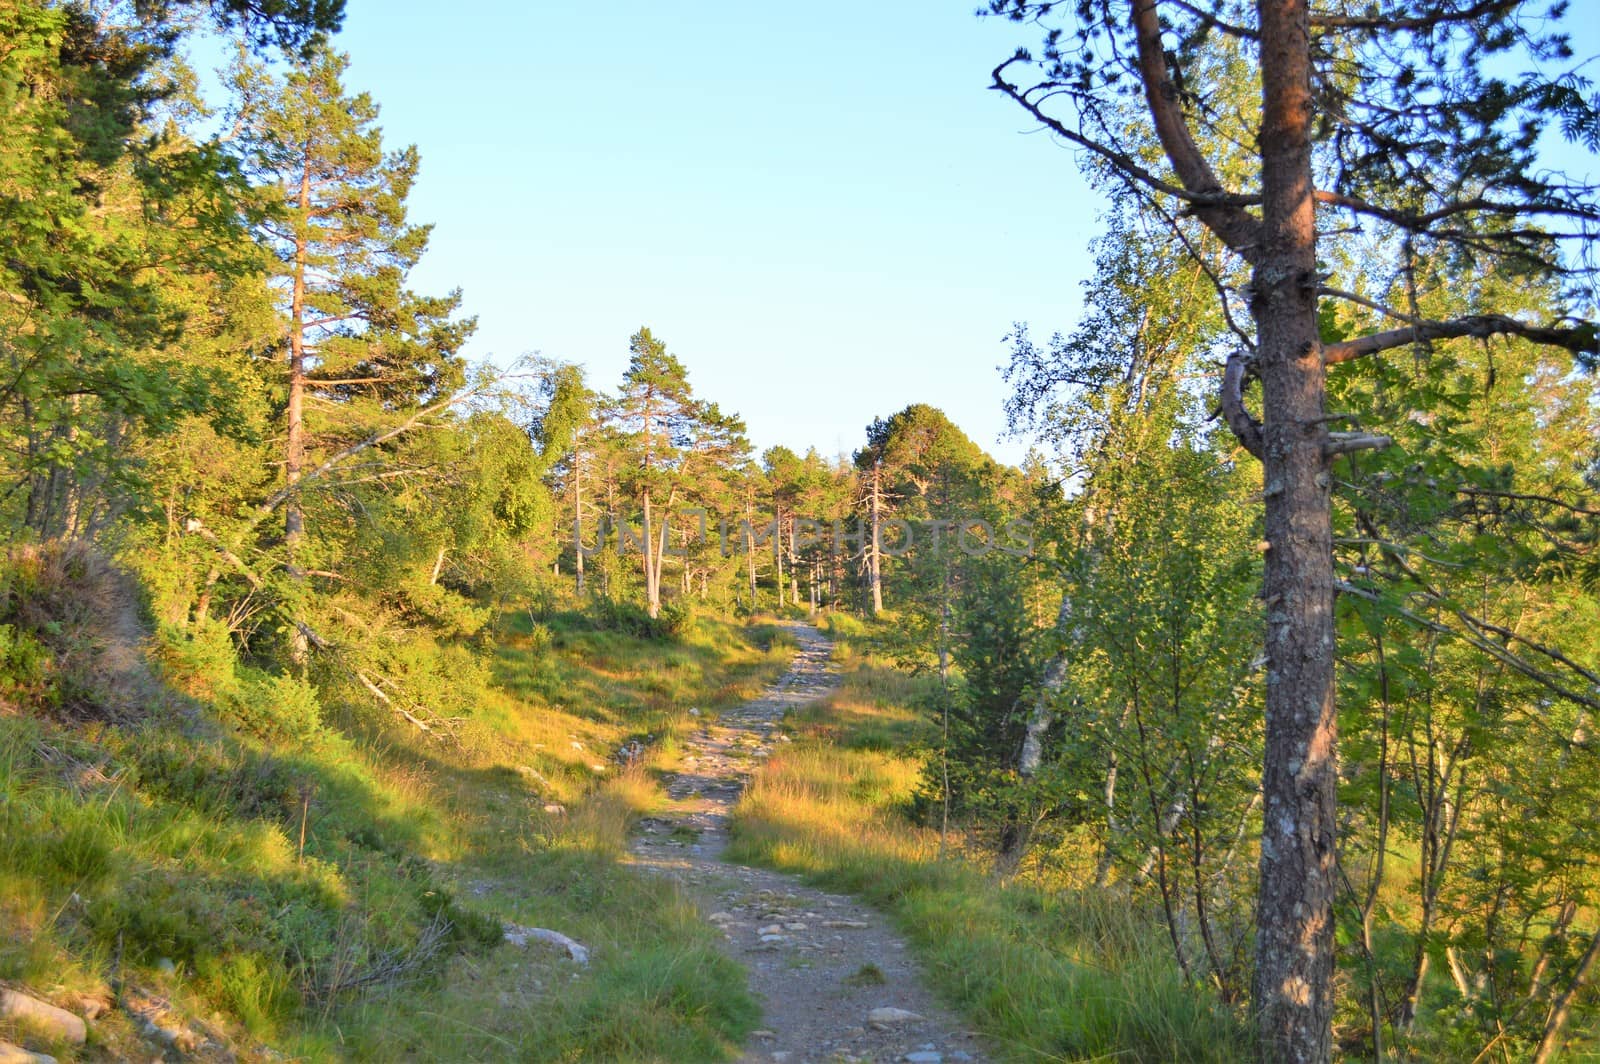 An image of a hiking trail on Norway's west coast.